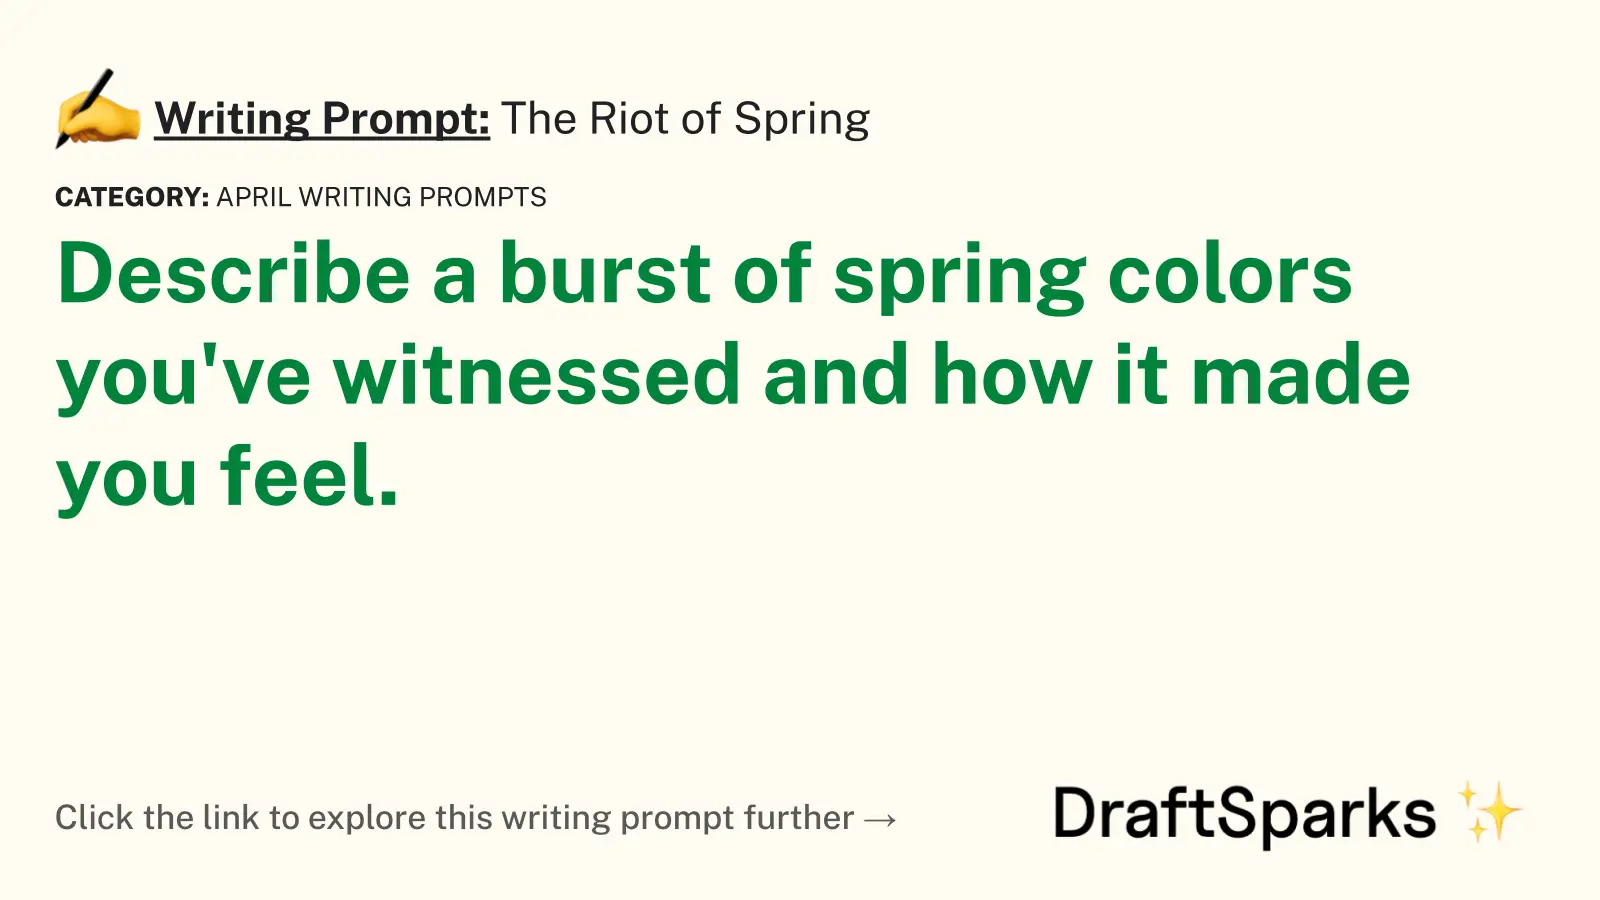 The Riot of Spring